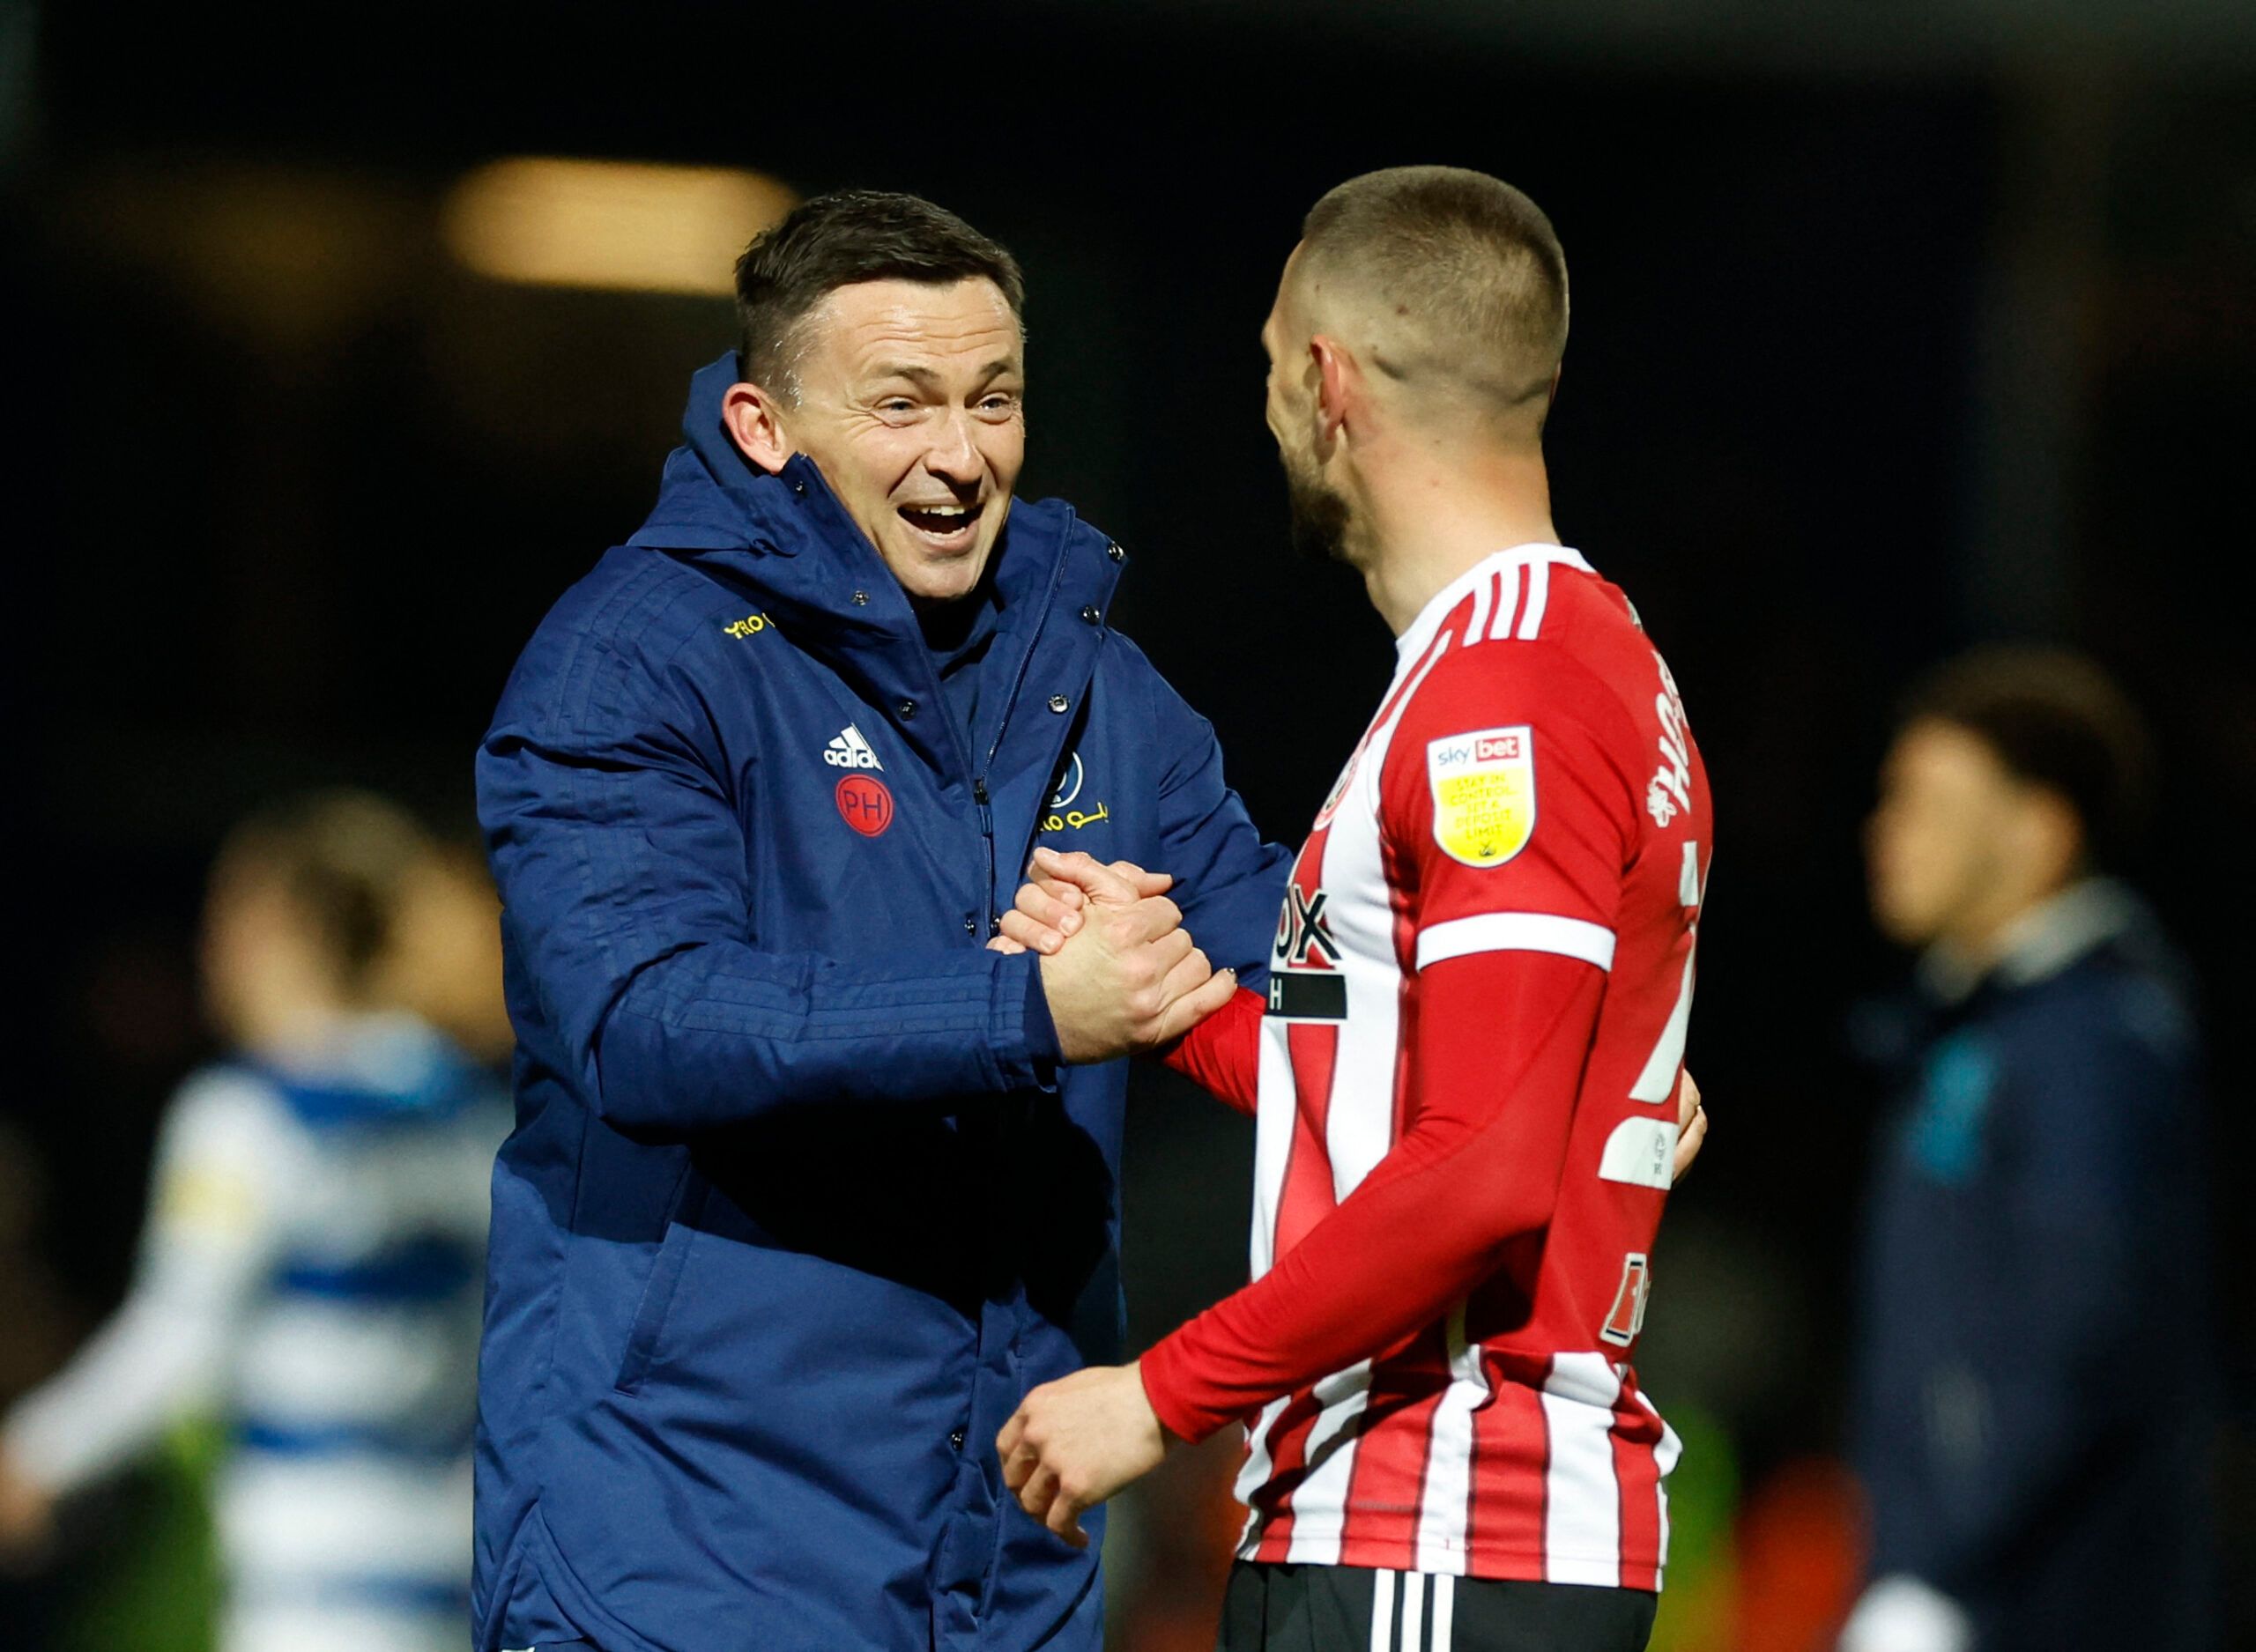 Soccer Football - Championship - Queens Park Rangers v Sheffield United - Loftus Road, London, Britain - April 29, 2022 Sheffield United's manger Paul Heckingbottom and Conor Hourihane celebrates after the match Action Images/Peter Cziborra EDITORIAL USE ONLY. No use with unauthorized audio, video, data, fixture lists, club/league logos or 'live' services. Online in-match use limited to 75 images, no video emulation. No use in betting, games or single club /league/player publications.  Please co